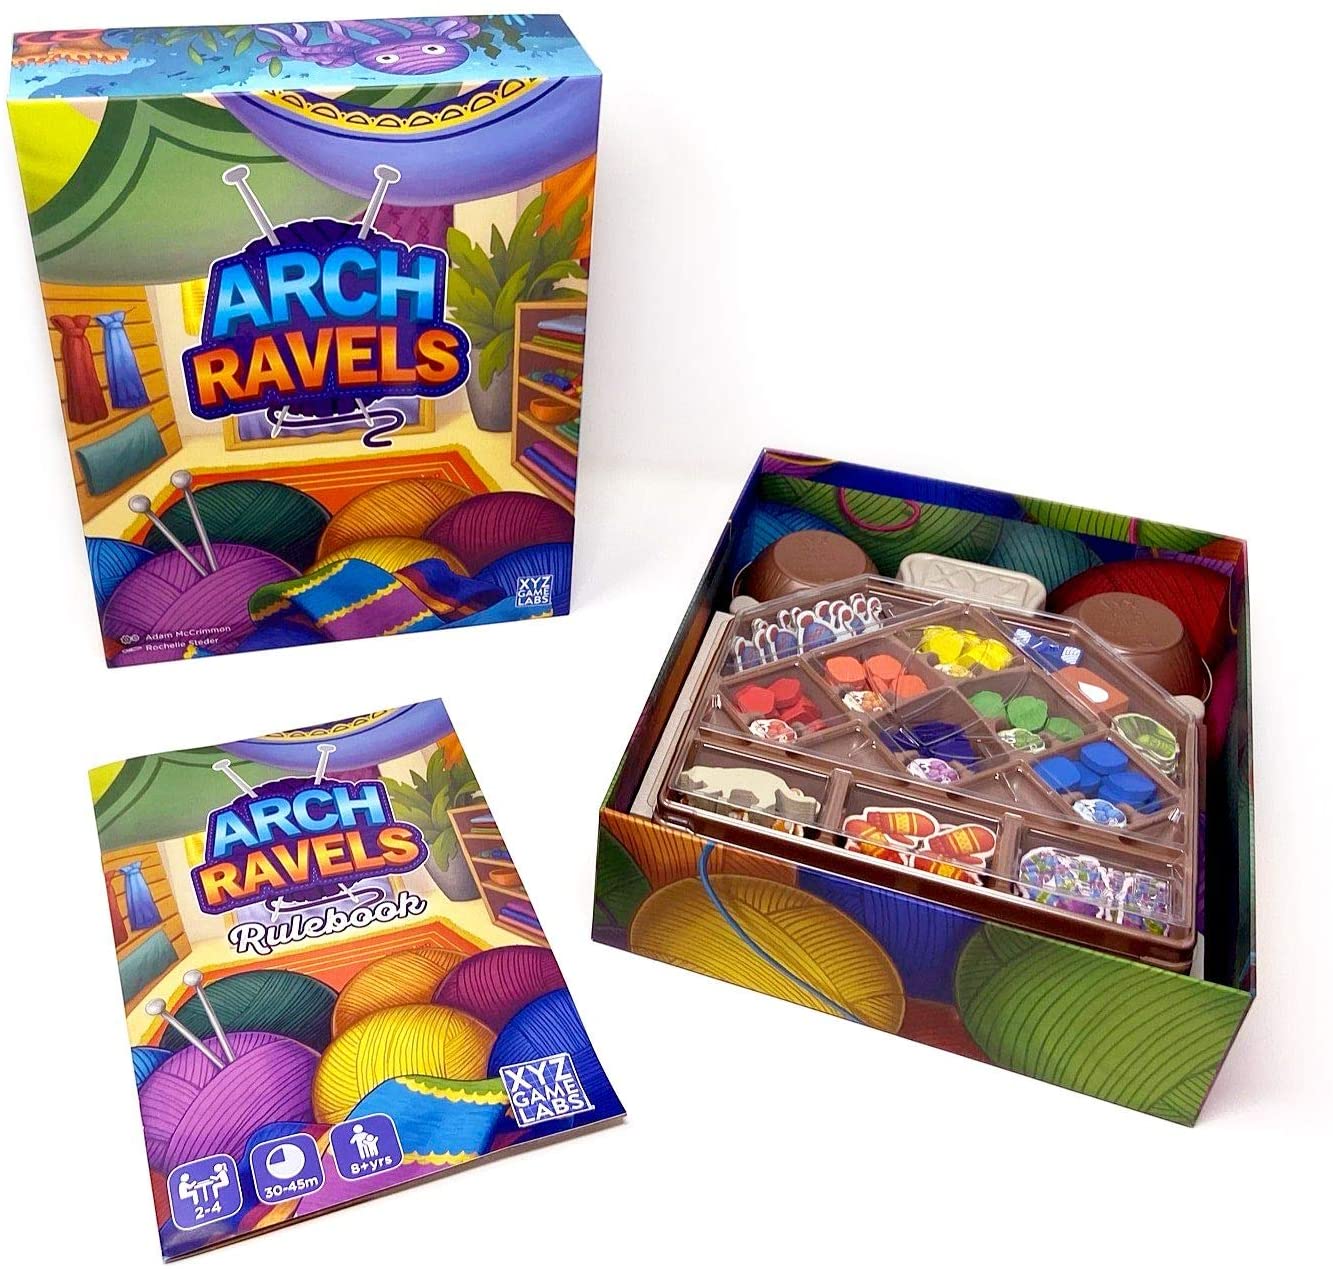 Arch Ravels box and contents